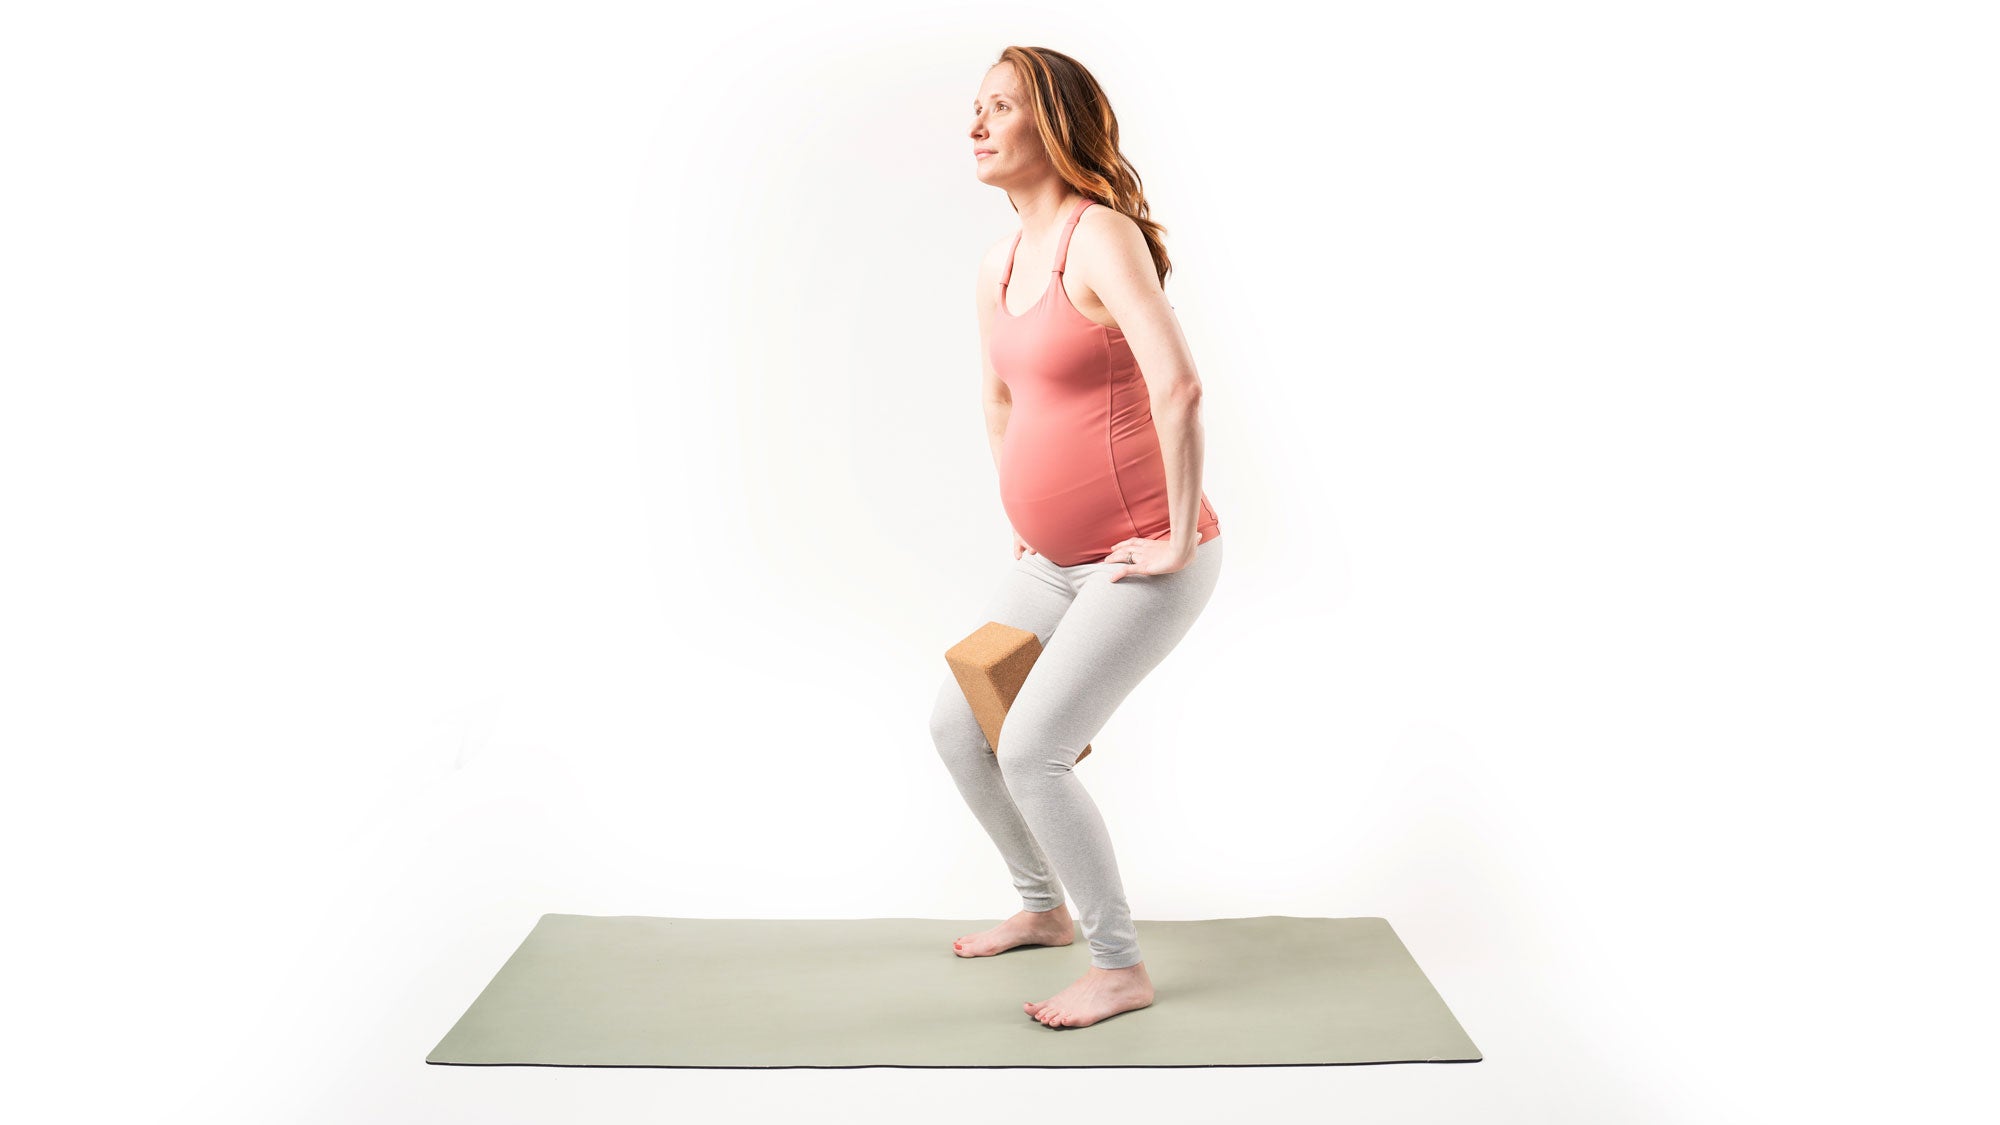 6 Yoga Poses For Your Second Trimester by Toronto Yoga Mamas